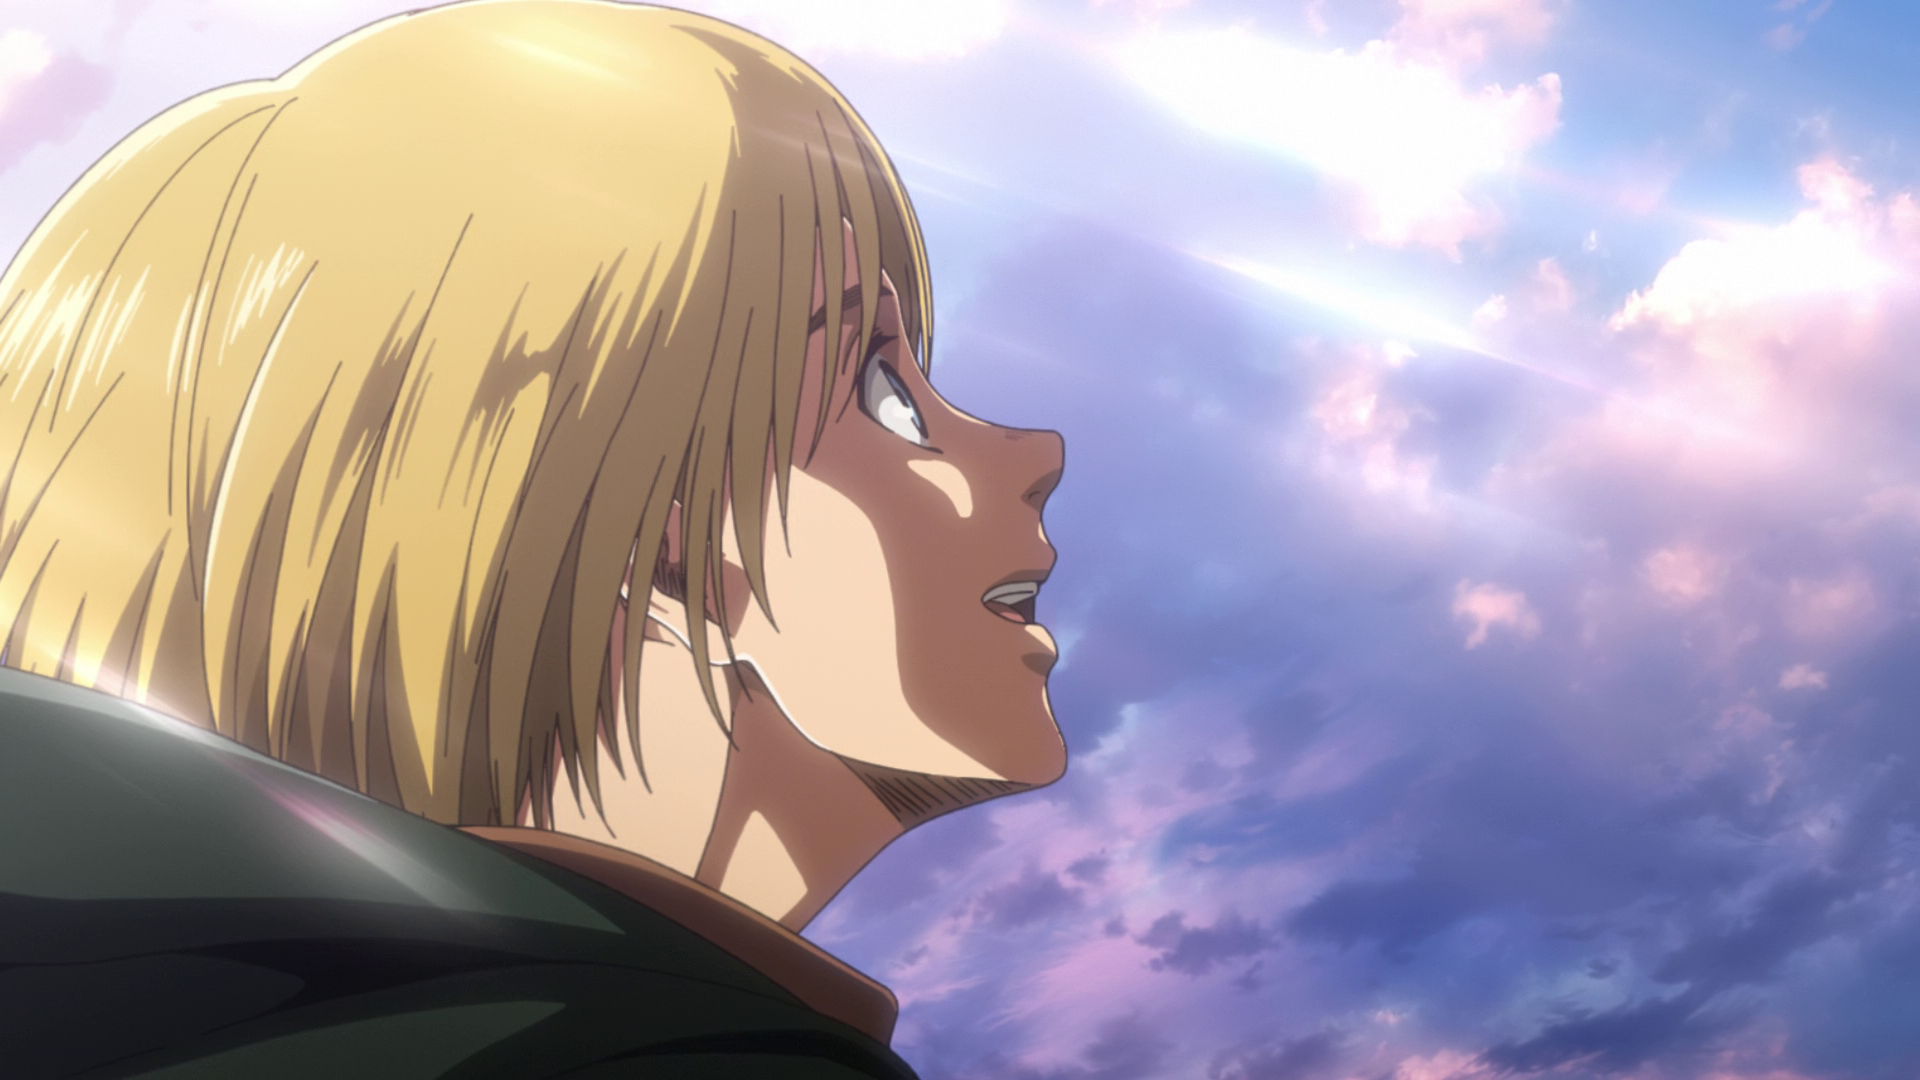 Latest 'Attack On Titan' Episode Leaves Fans Completely Astounded